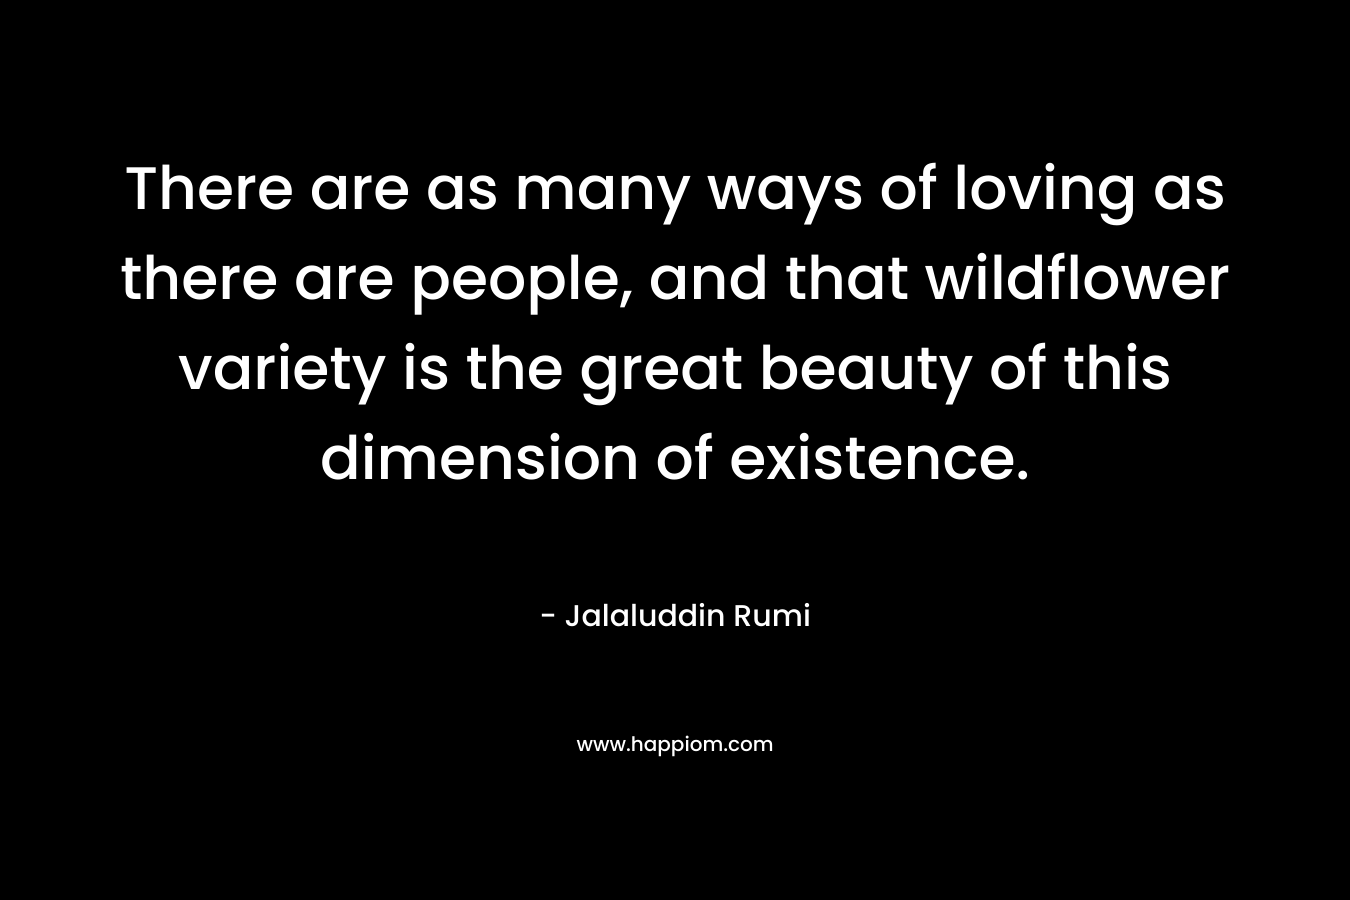 There are as many ways of loving as there are people, and that wildflower variety is the great beauty of this dimension of existence. – Jalaluddin Rumi